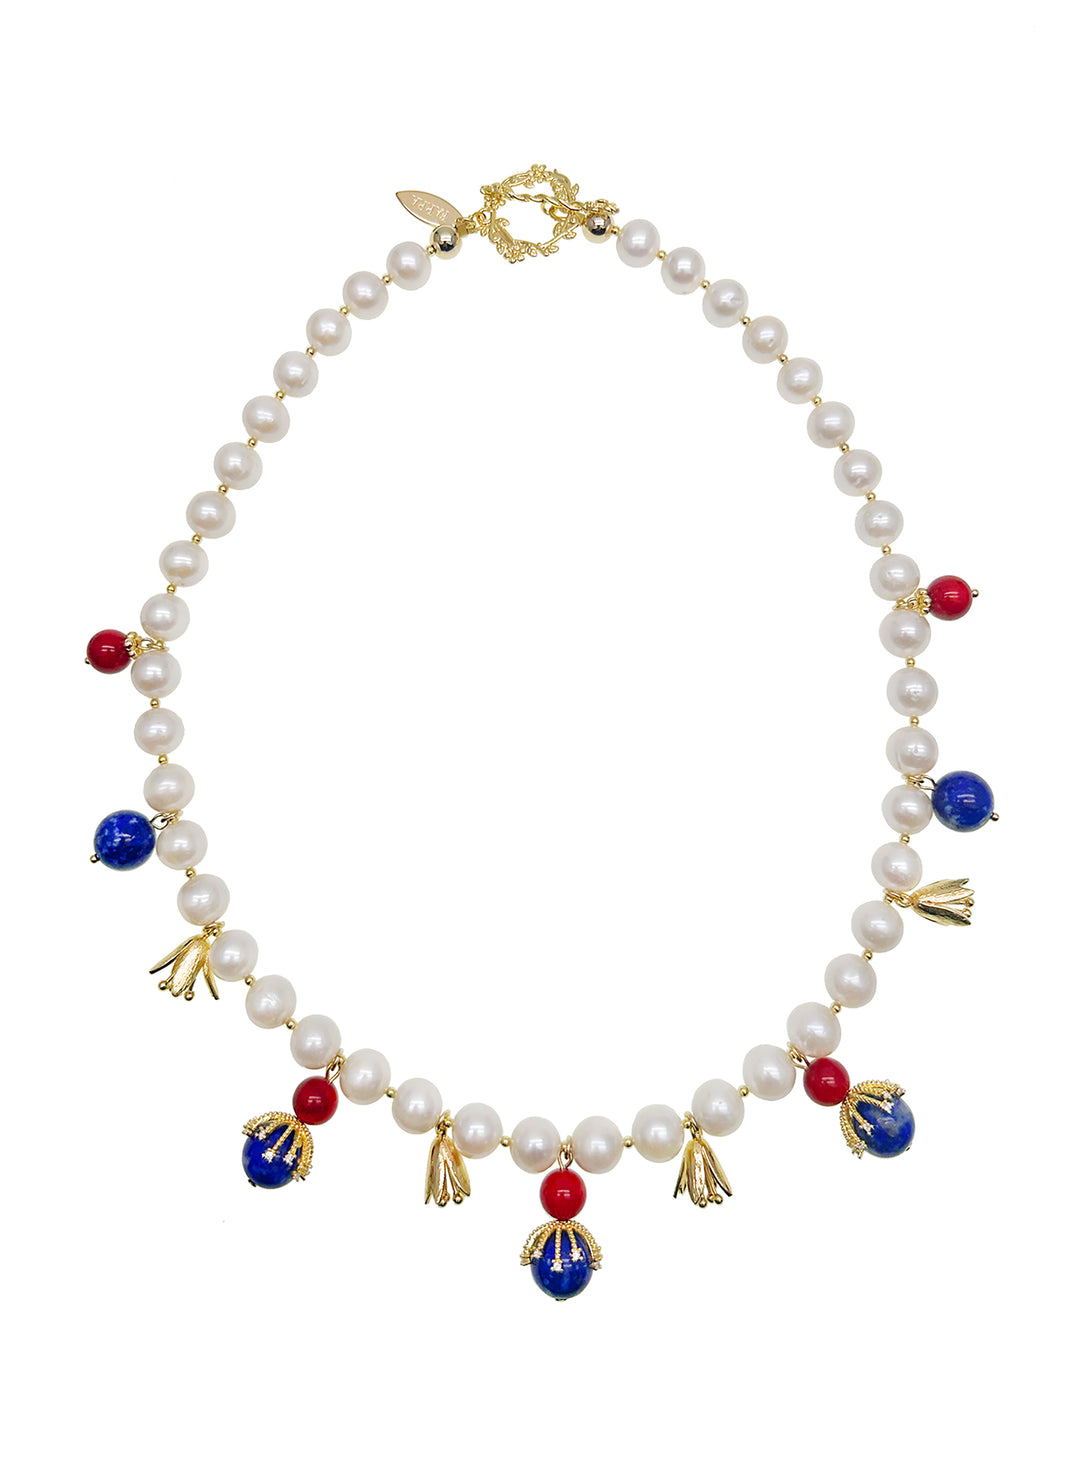 Freshwater Pearls With Lapis and Red Coral Pendents Necklace JN021 - FARRA